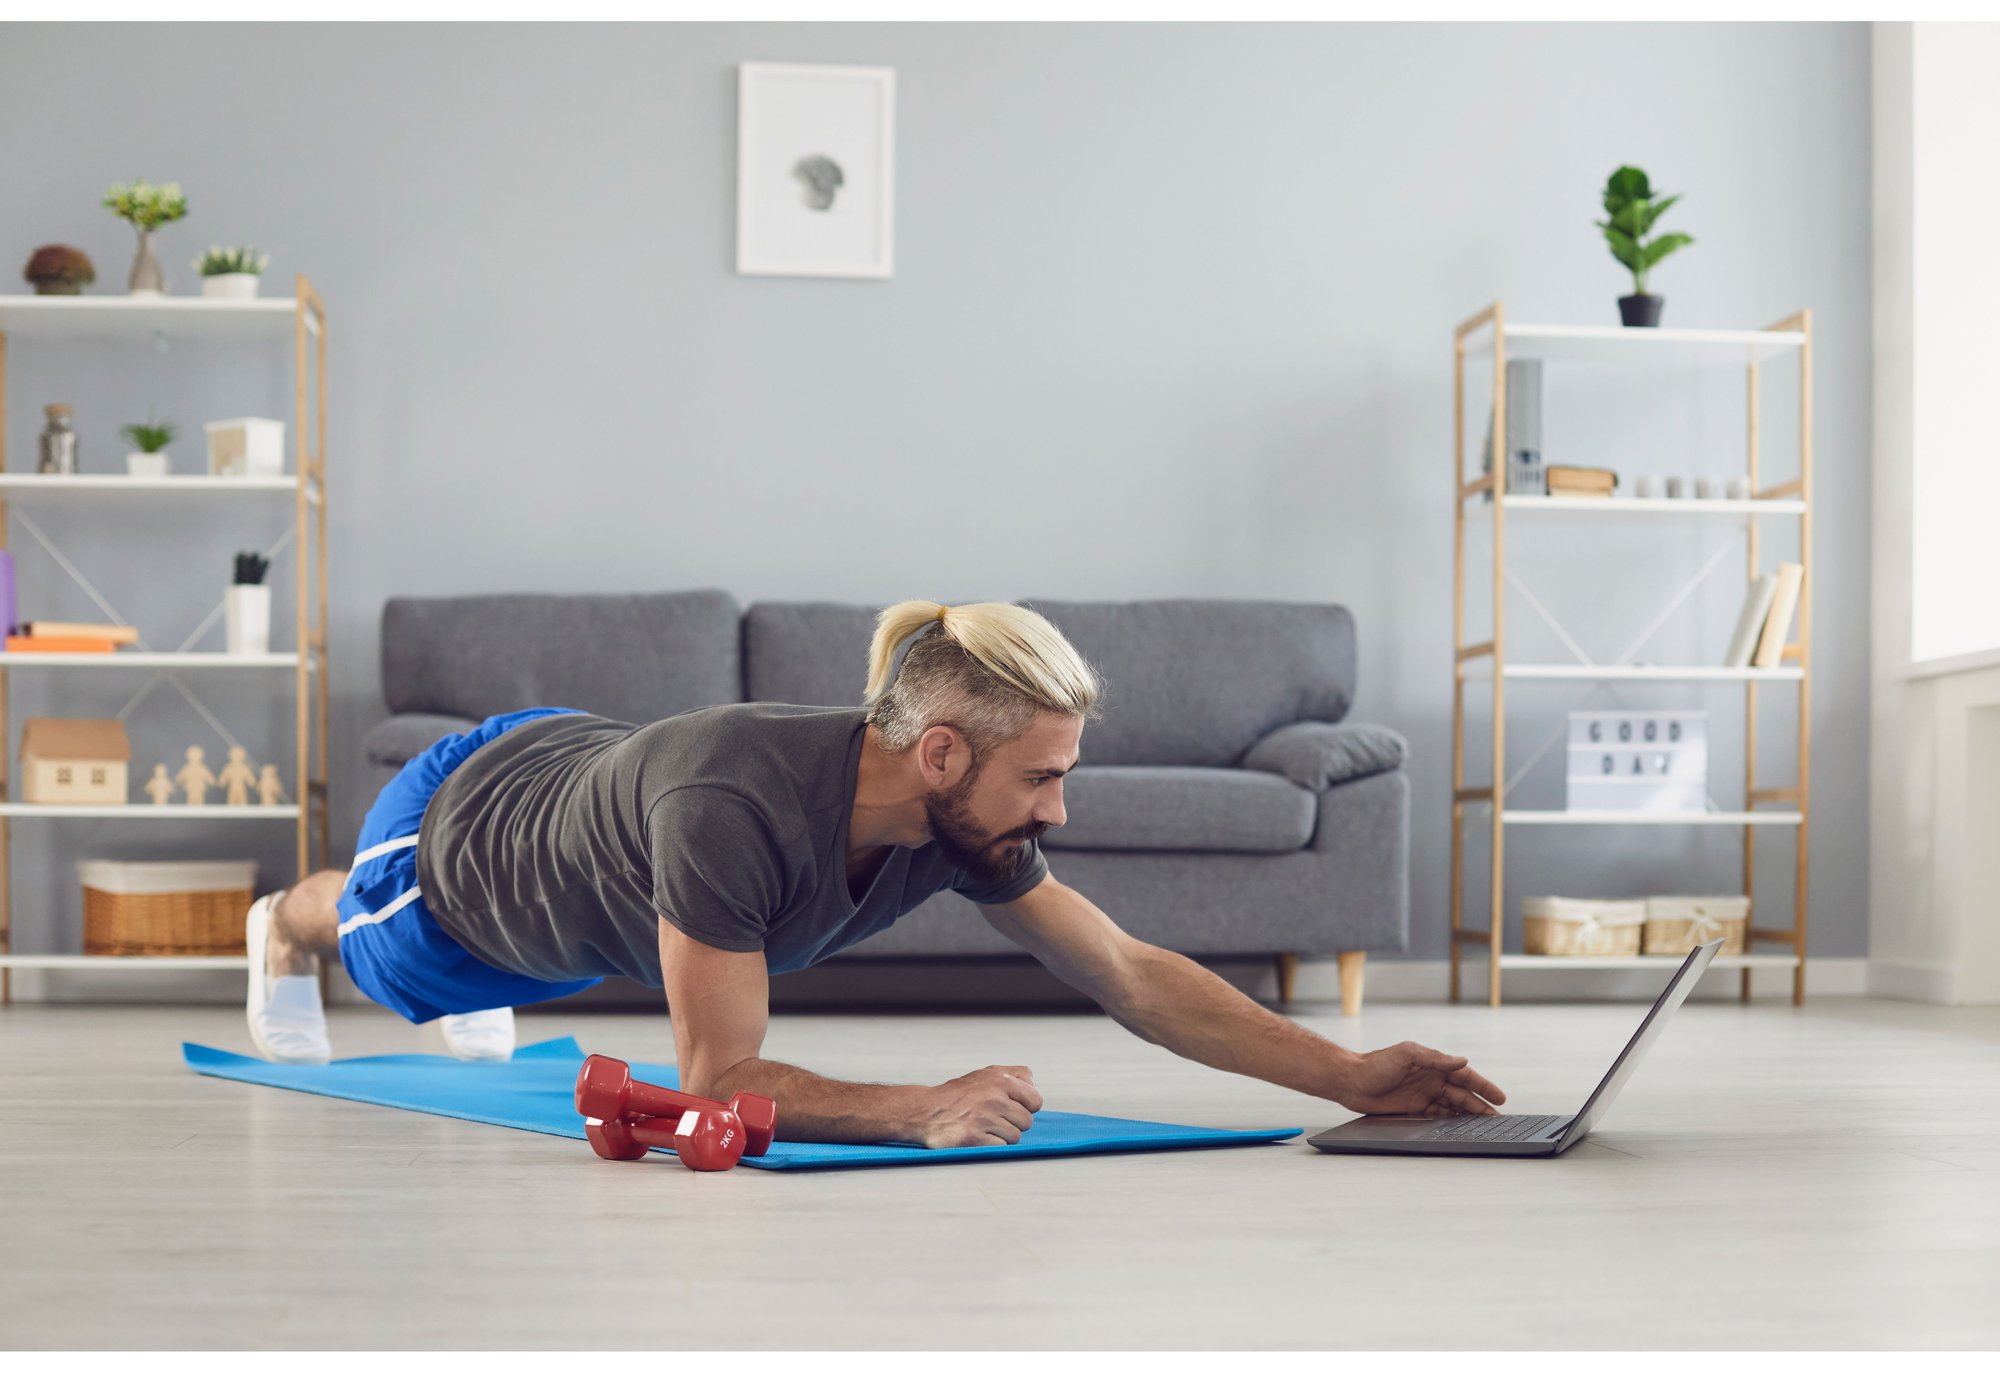 fit healthy man with blue shorts and grey t-shirt doing a plank on his yoga mat in front of his laptop at home